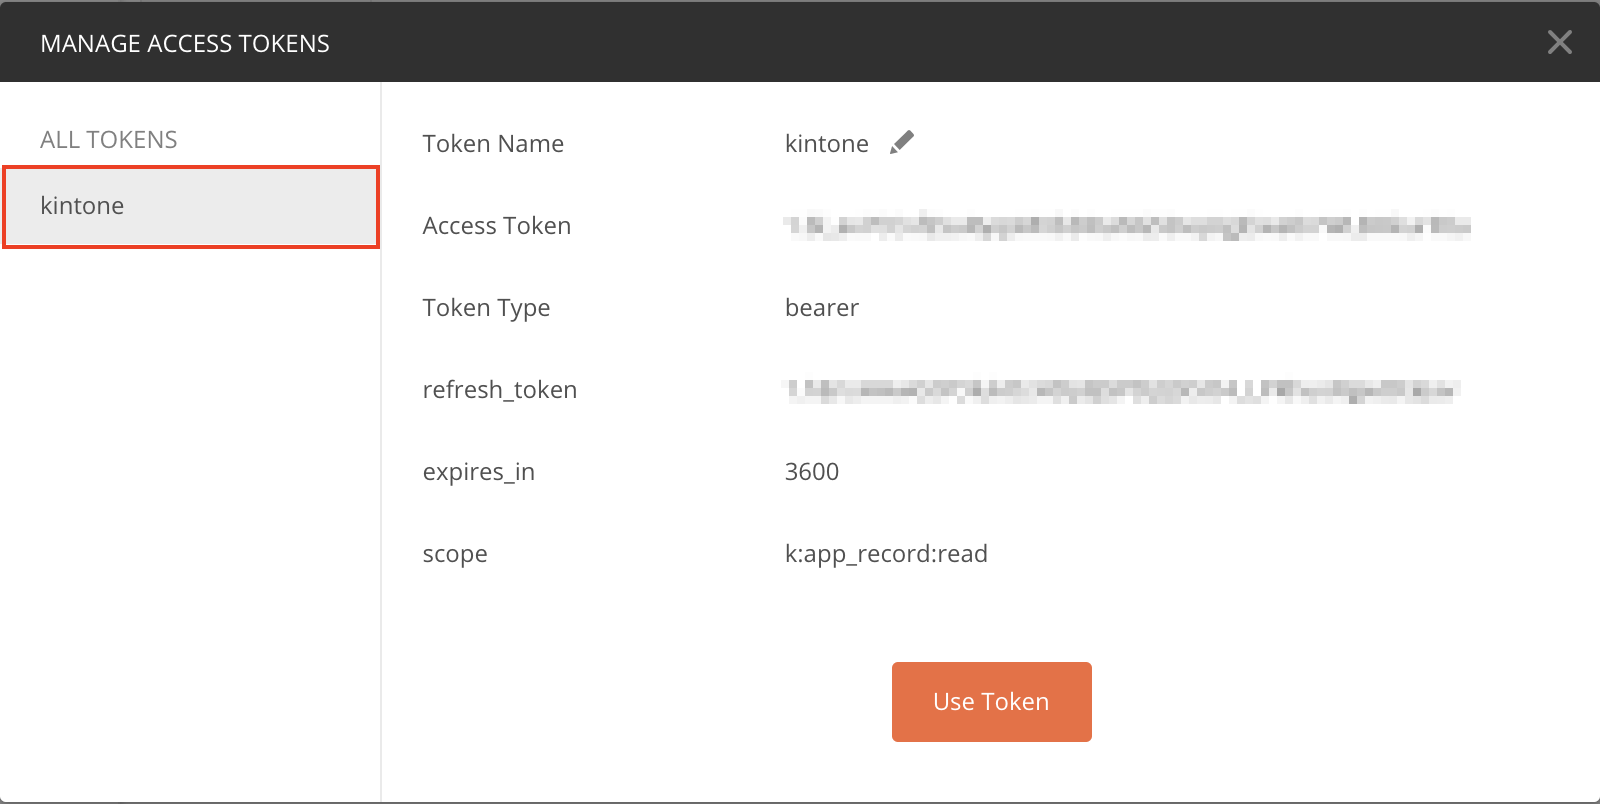 Screenshot: Postman showing the MANAGE ACCESS TOKENS settings with Kintone's information inside.